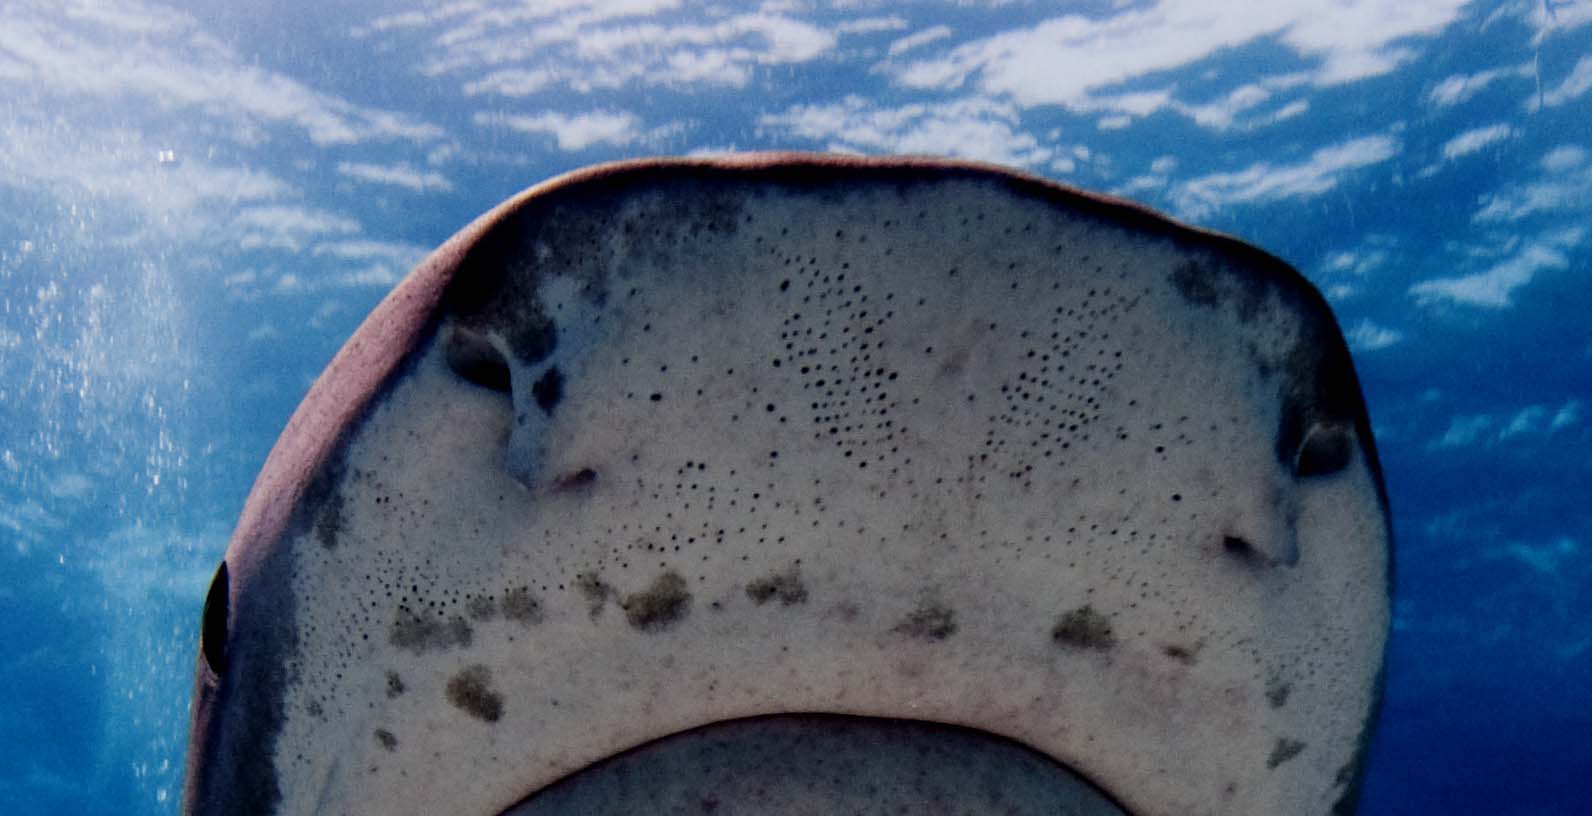 Many sensory pores on the ventral portion of the snout of Tiger Shark